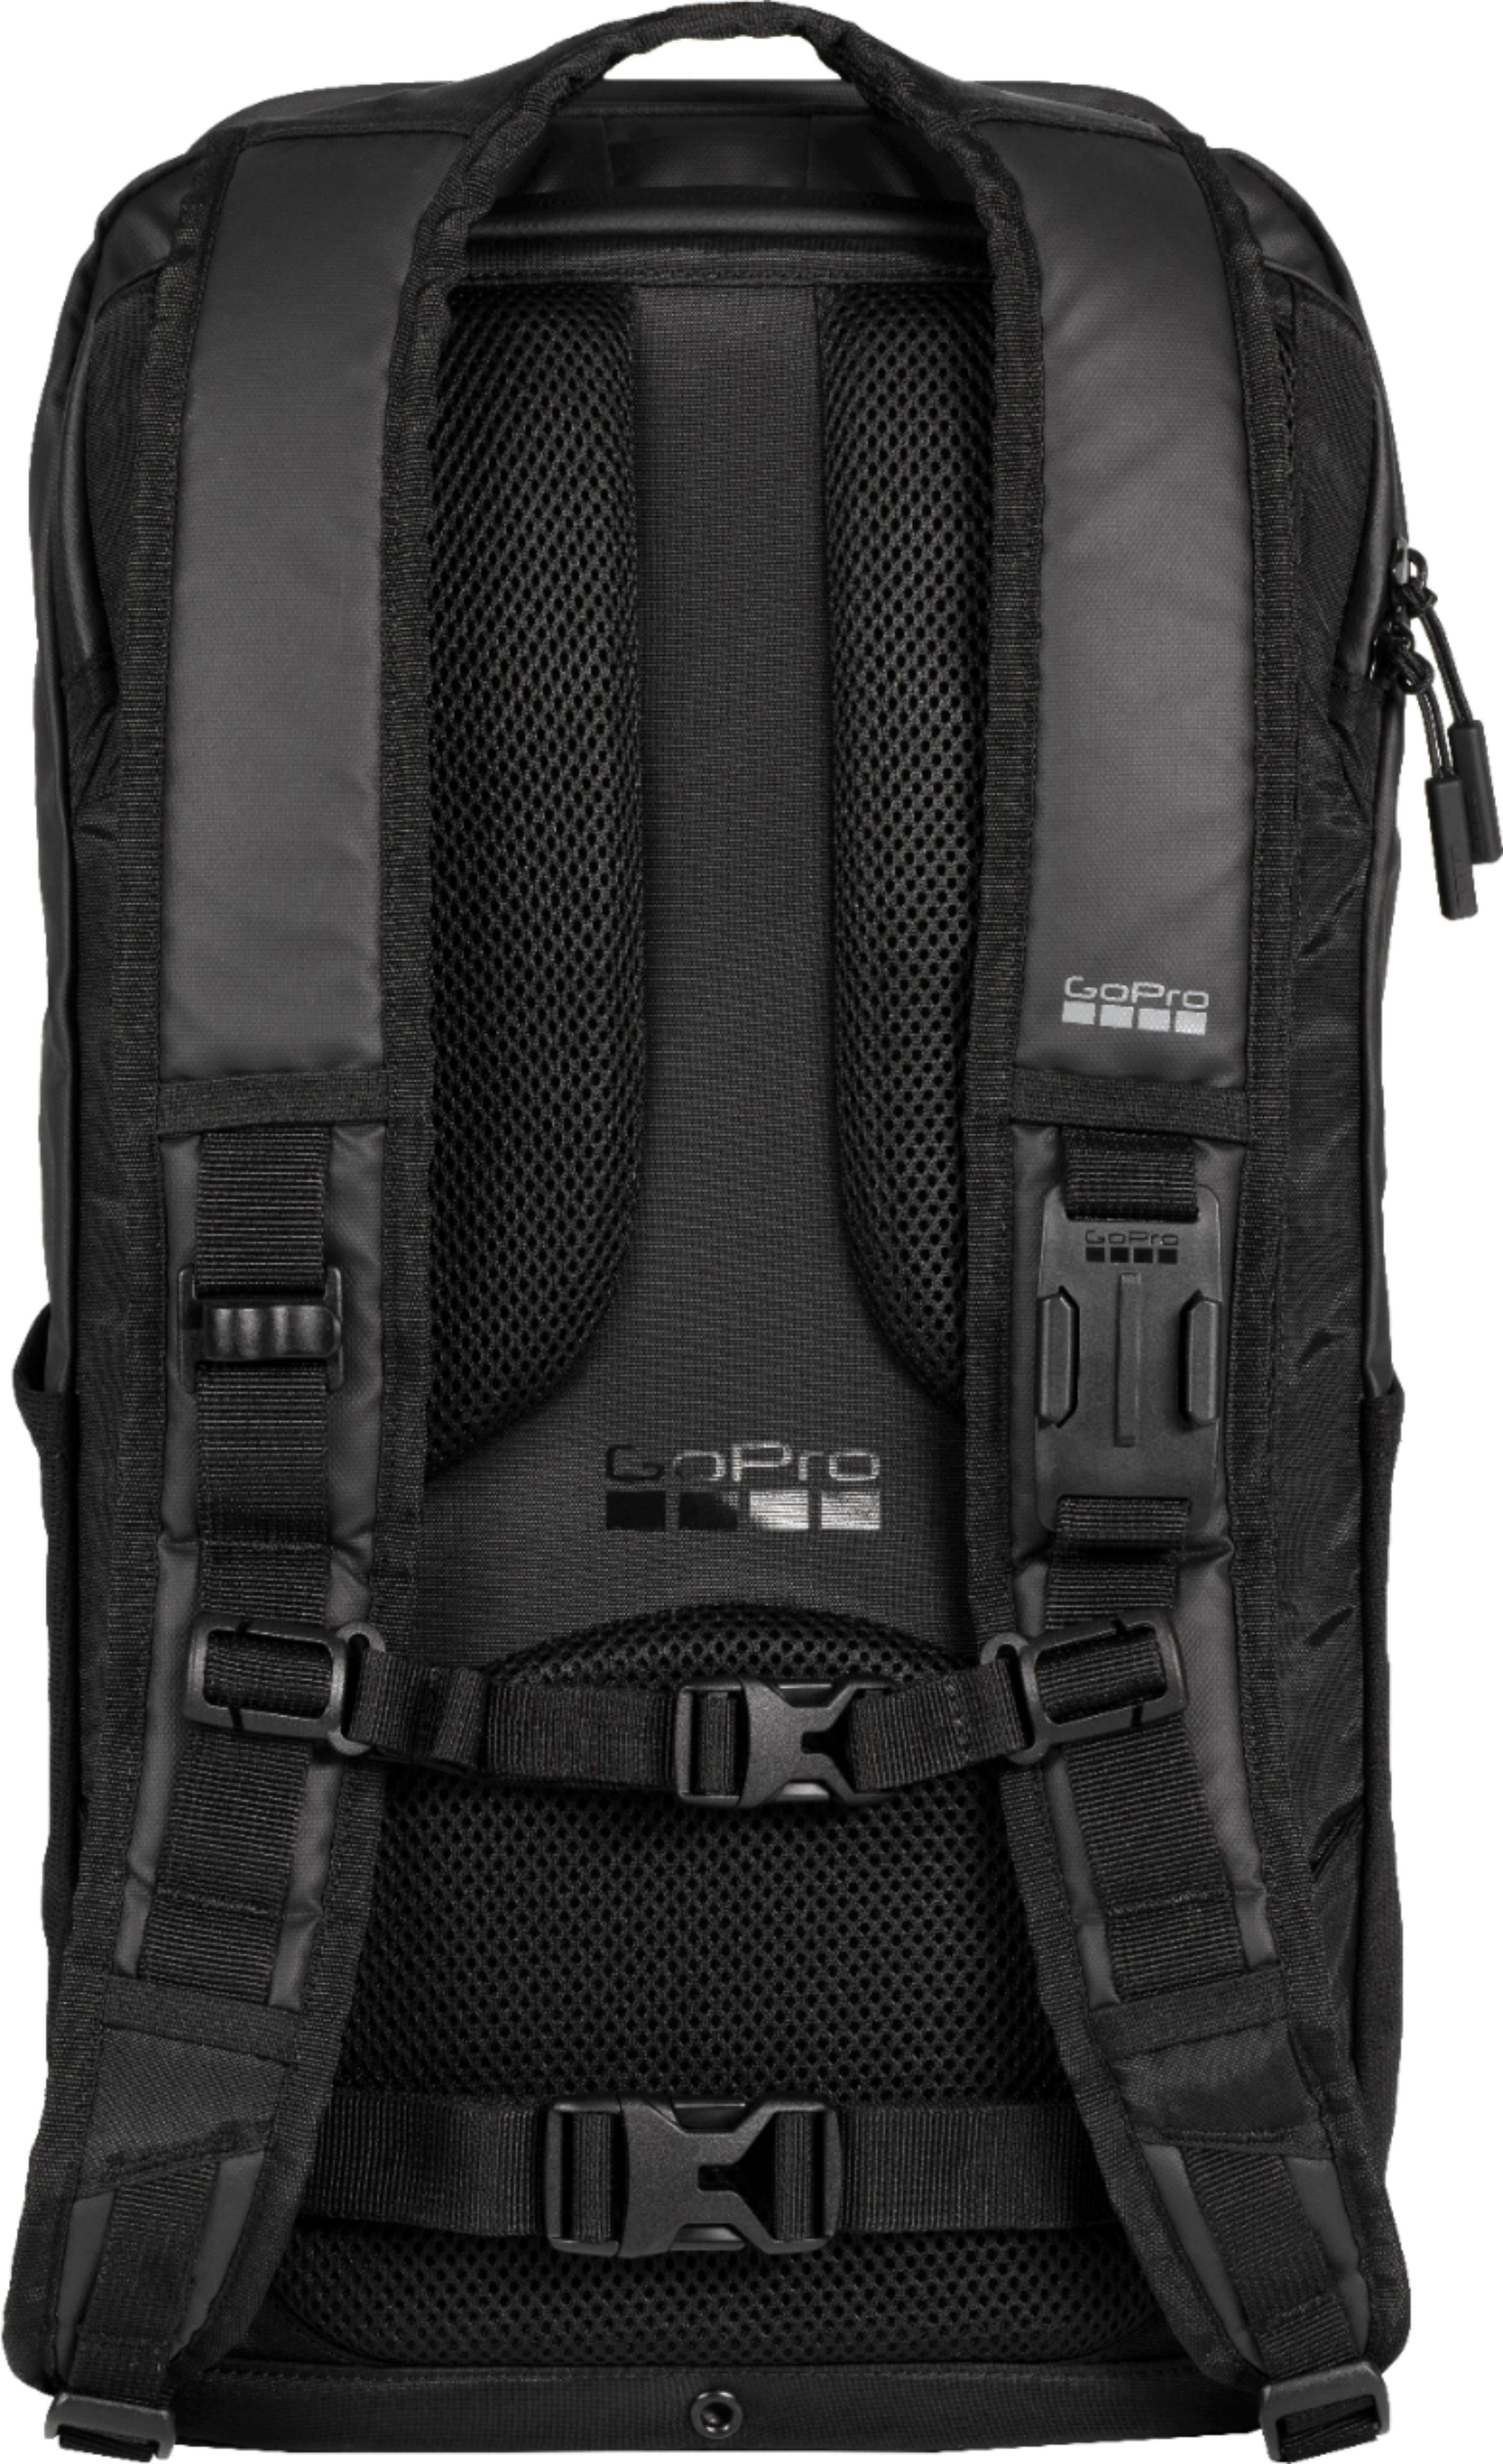 Back View: Solo New York - Active Laptop Backpack for 17.3" Laptop - Black/Gray